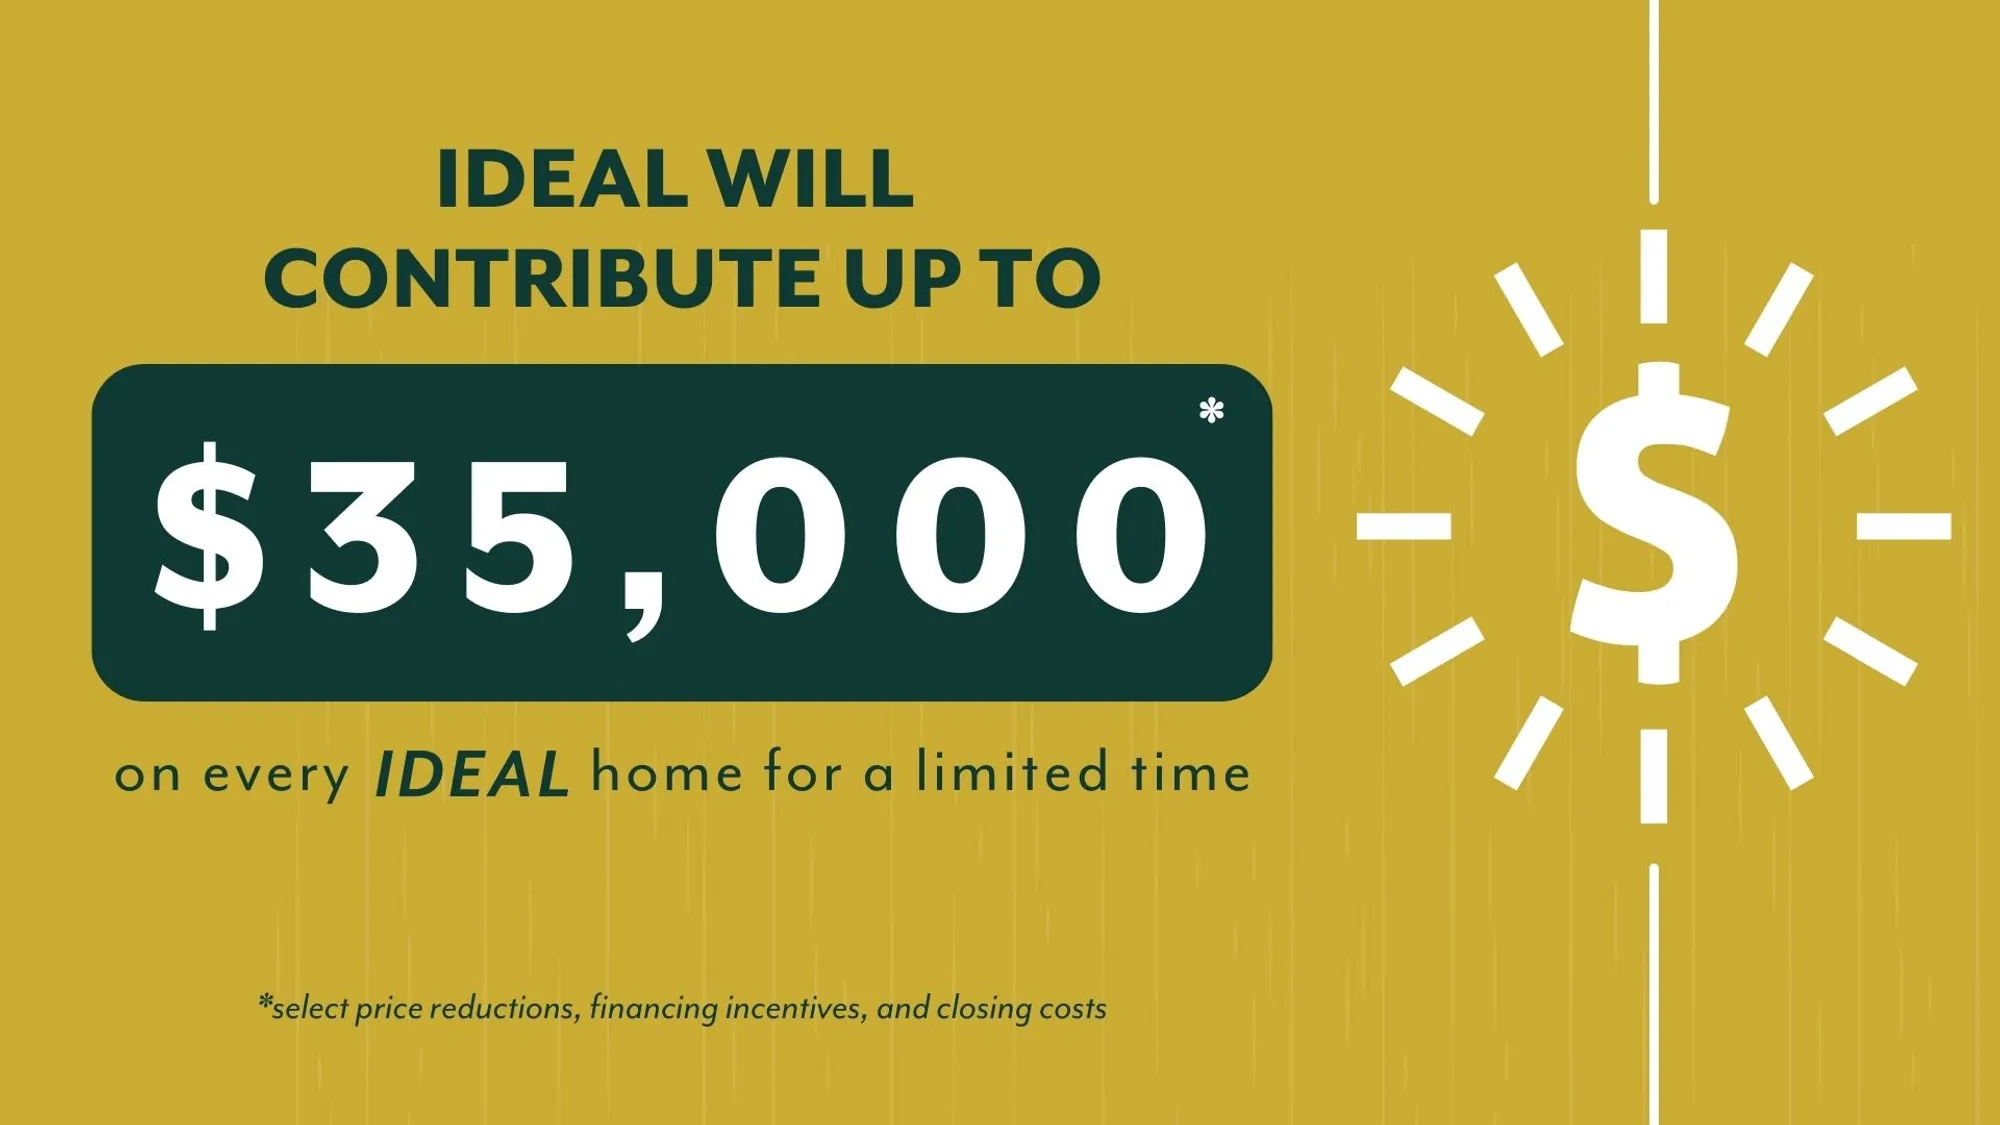 Ideal will contribute up to $35,000 on every Ideal home for a limited time